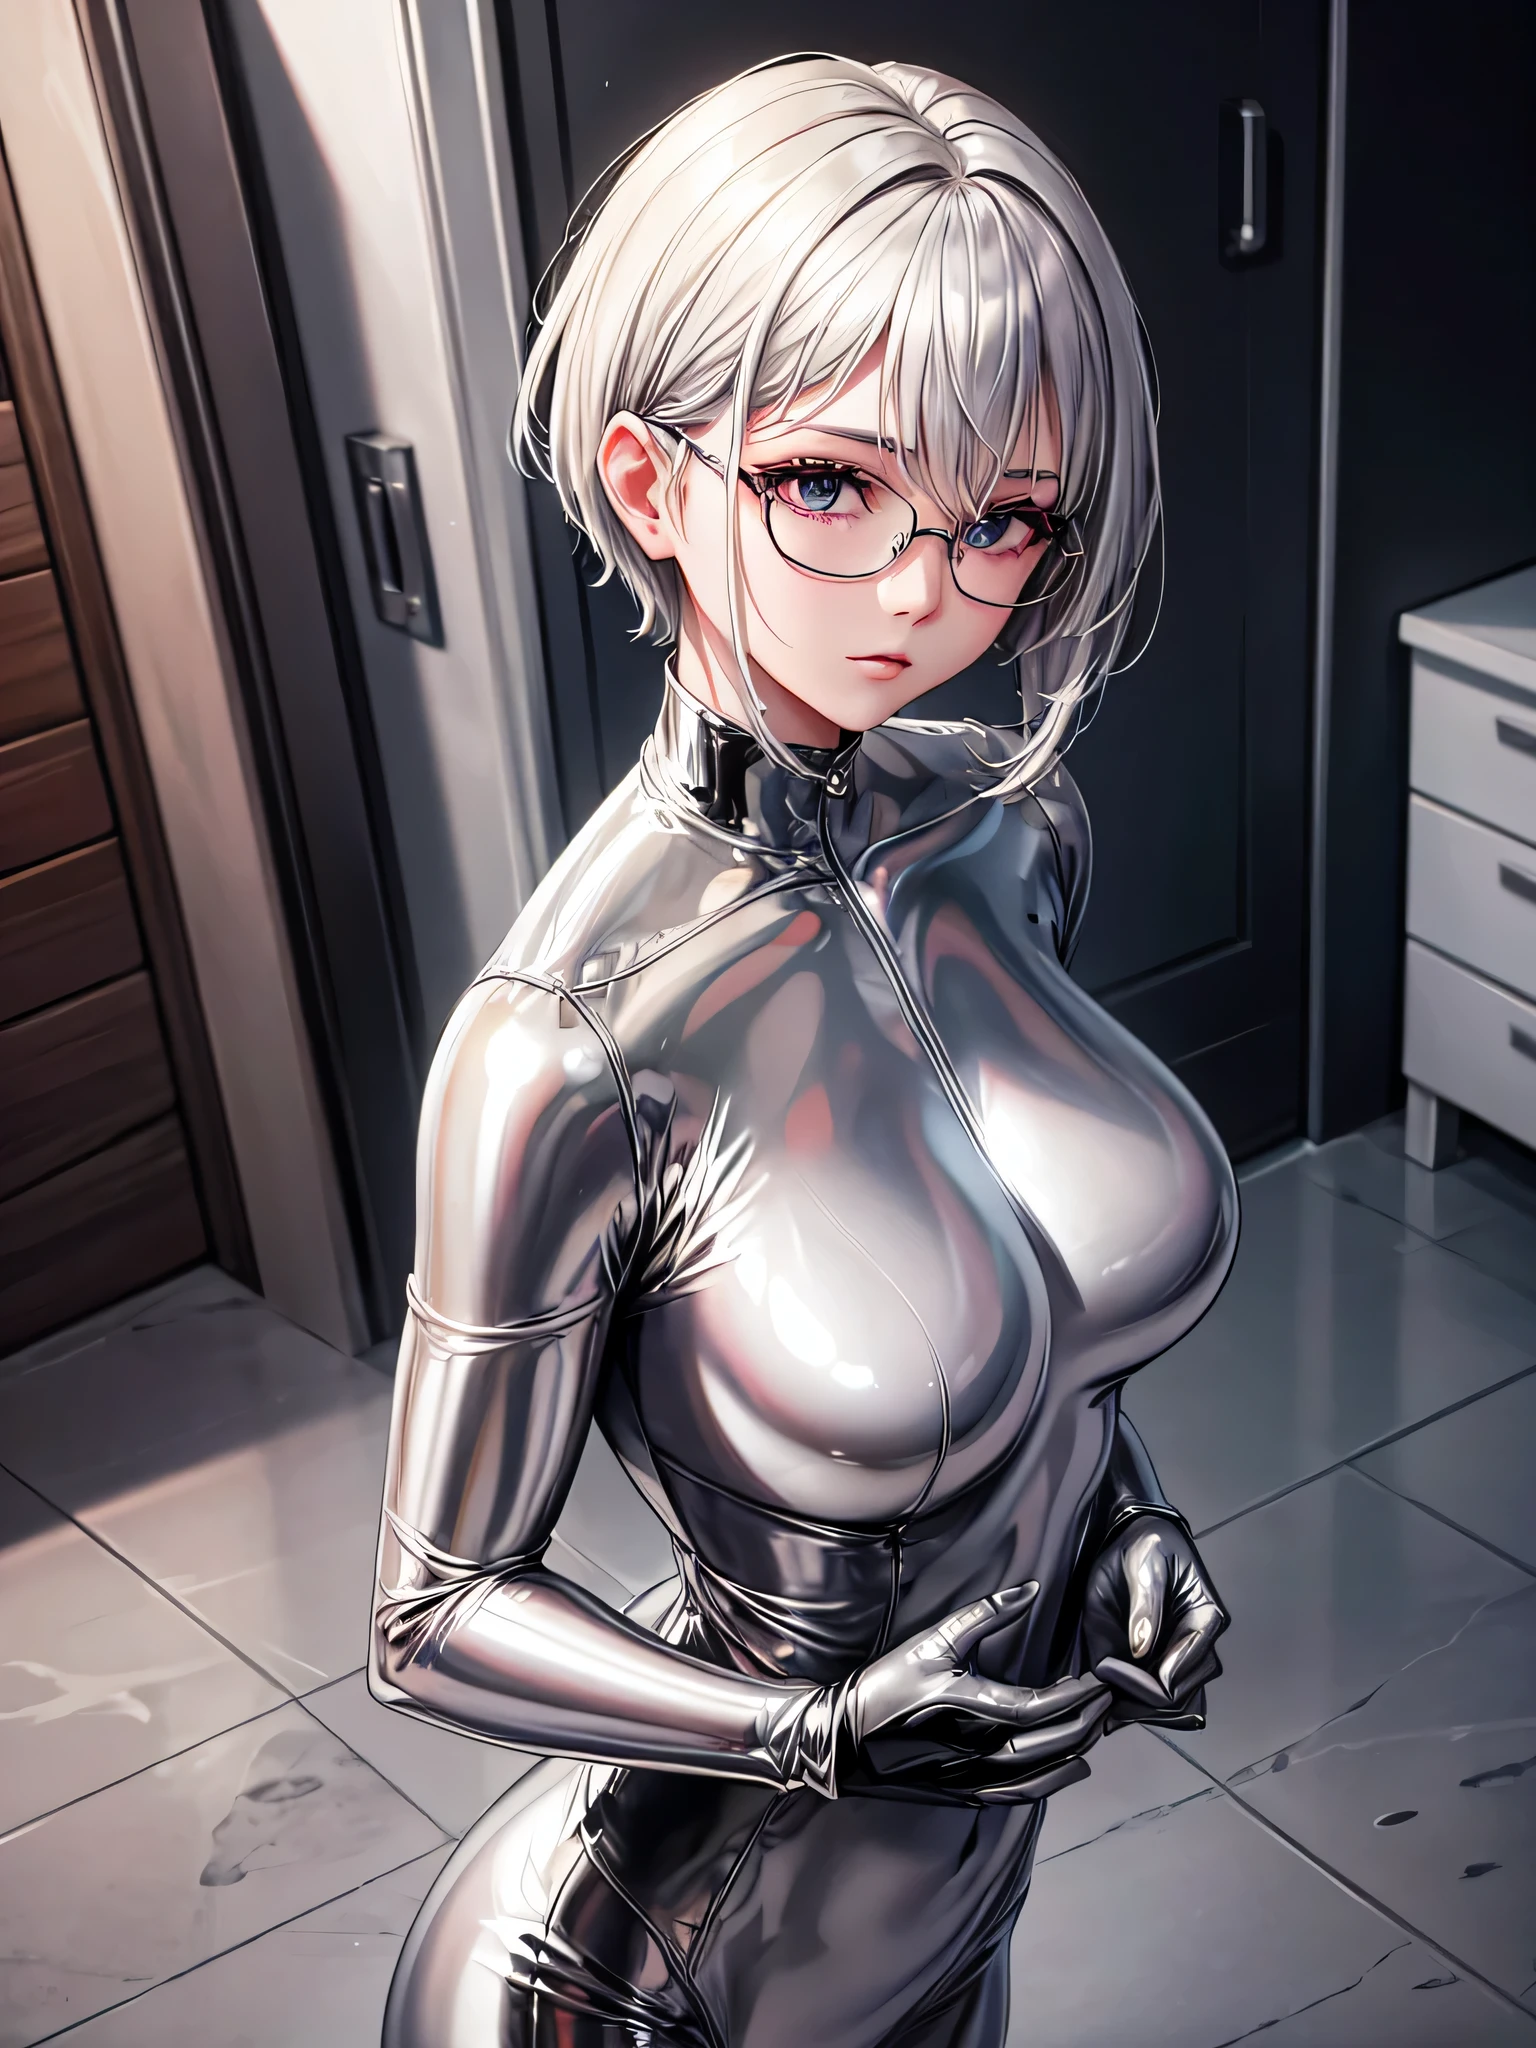 Top quality 8K UHD、Beautiful woman with short hair and silver hair wearing glasses and a silver metallic bodysuit、Shiny silver metallic bodysuit that hides your skin